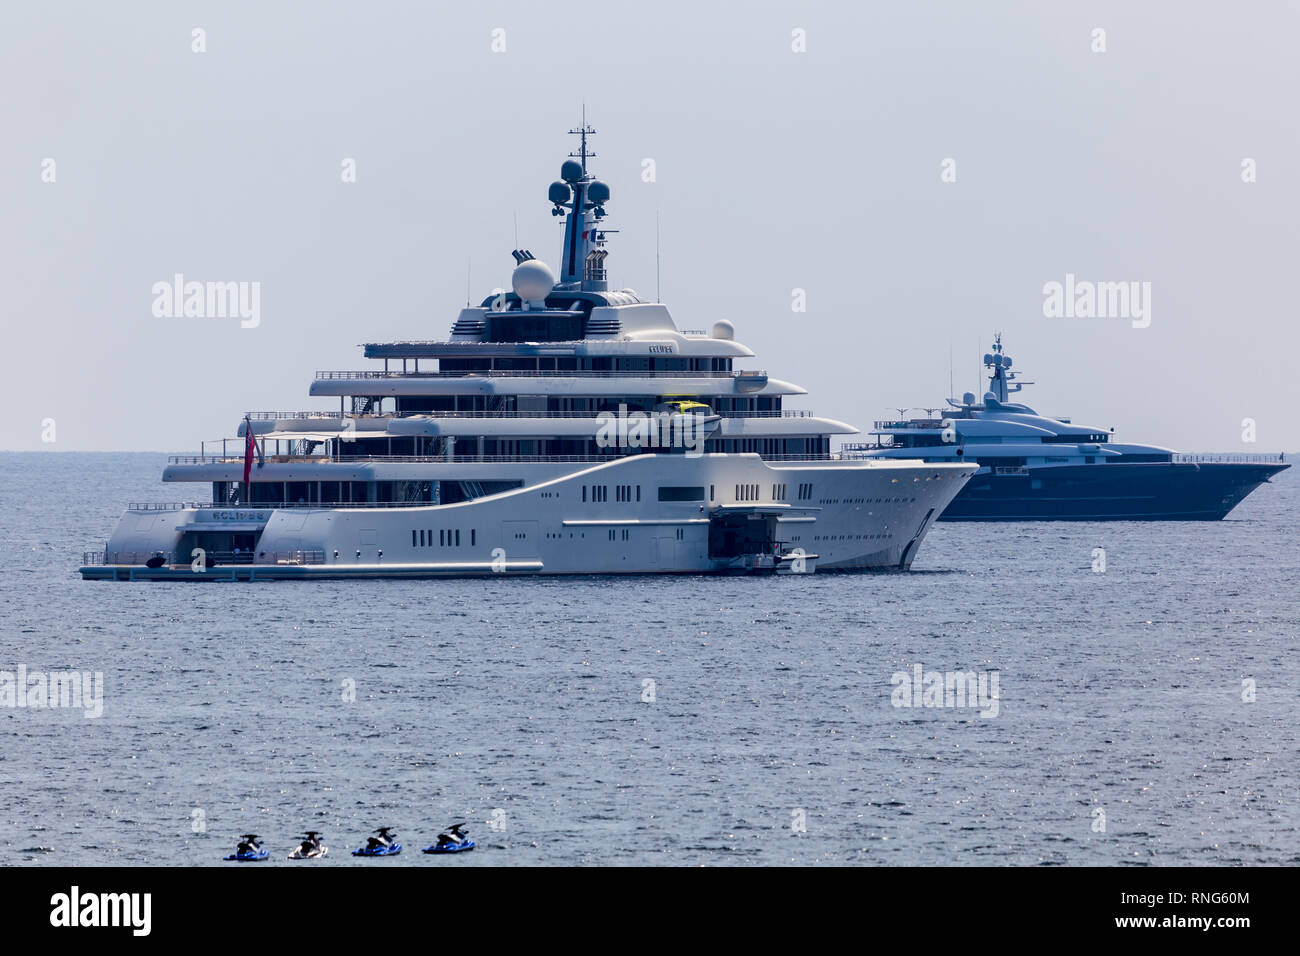 Yachts of Russian oligarchs, Eclipse (Roman Abramovich) and Nirvana (Vladimir Potanin) anchored next to each other near the town of Antibes in France Stock Photo